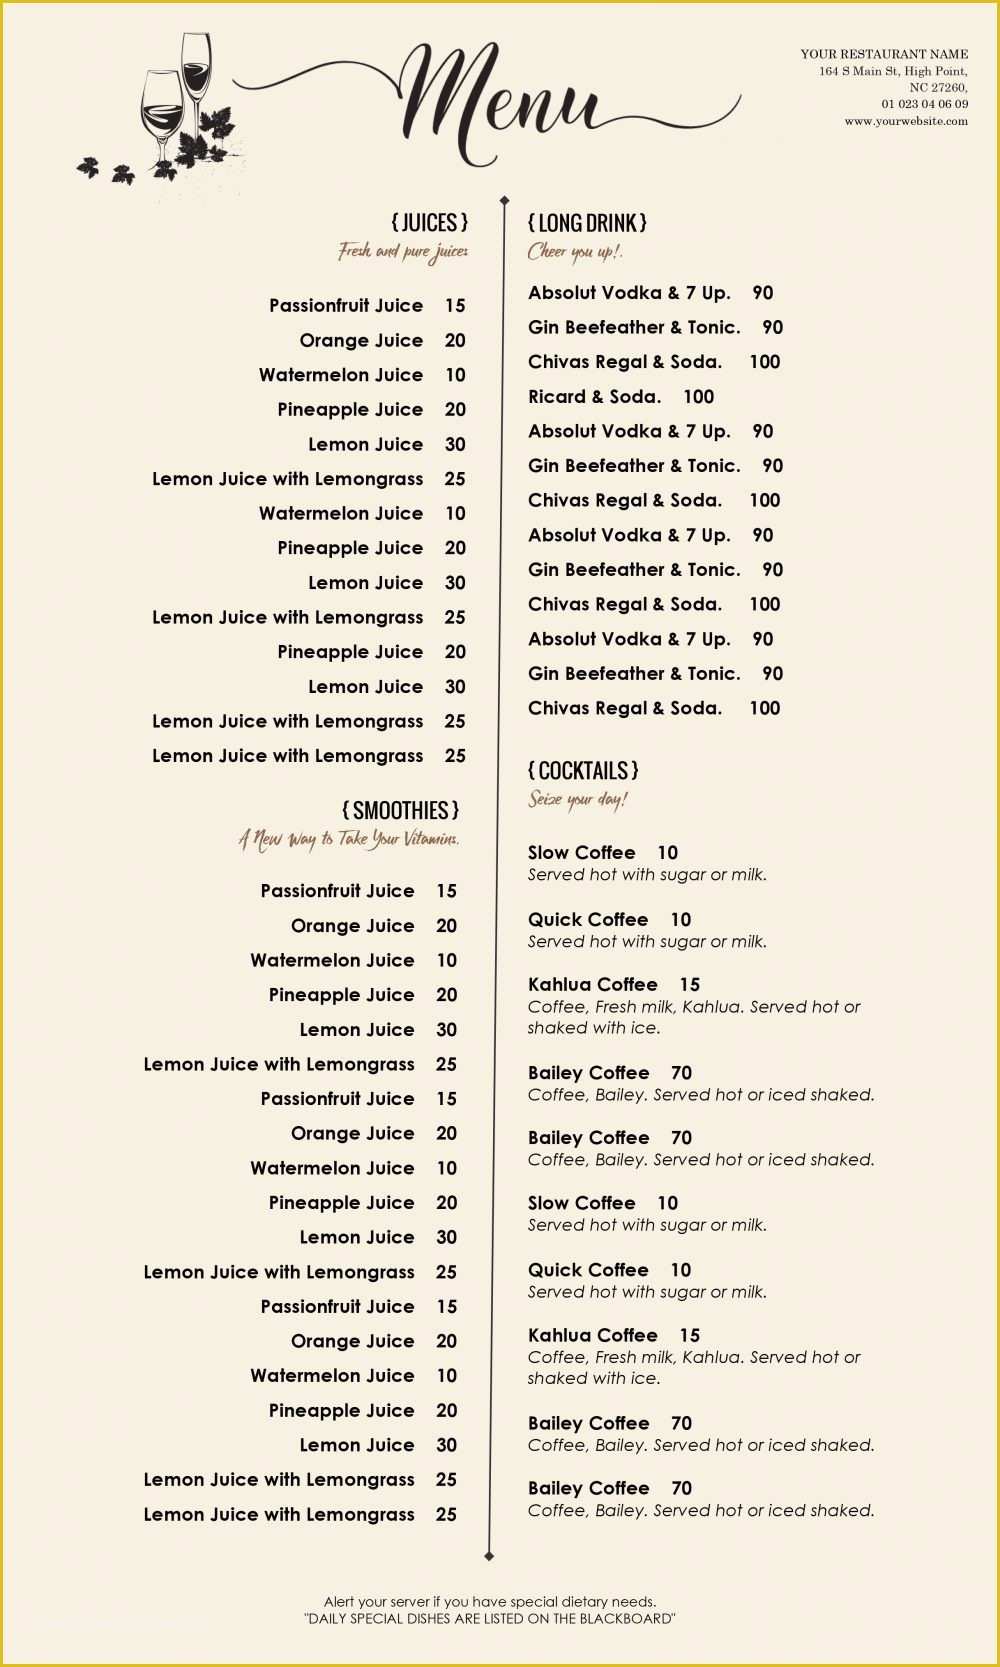 Free Restaurant Menu Templates for Word Of Design &amp; Templates Menu Templates Wedding Menu Food